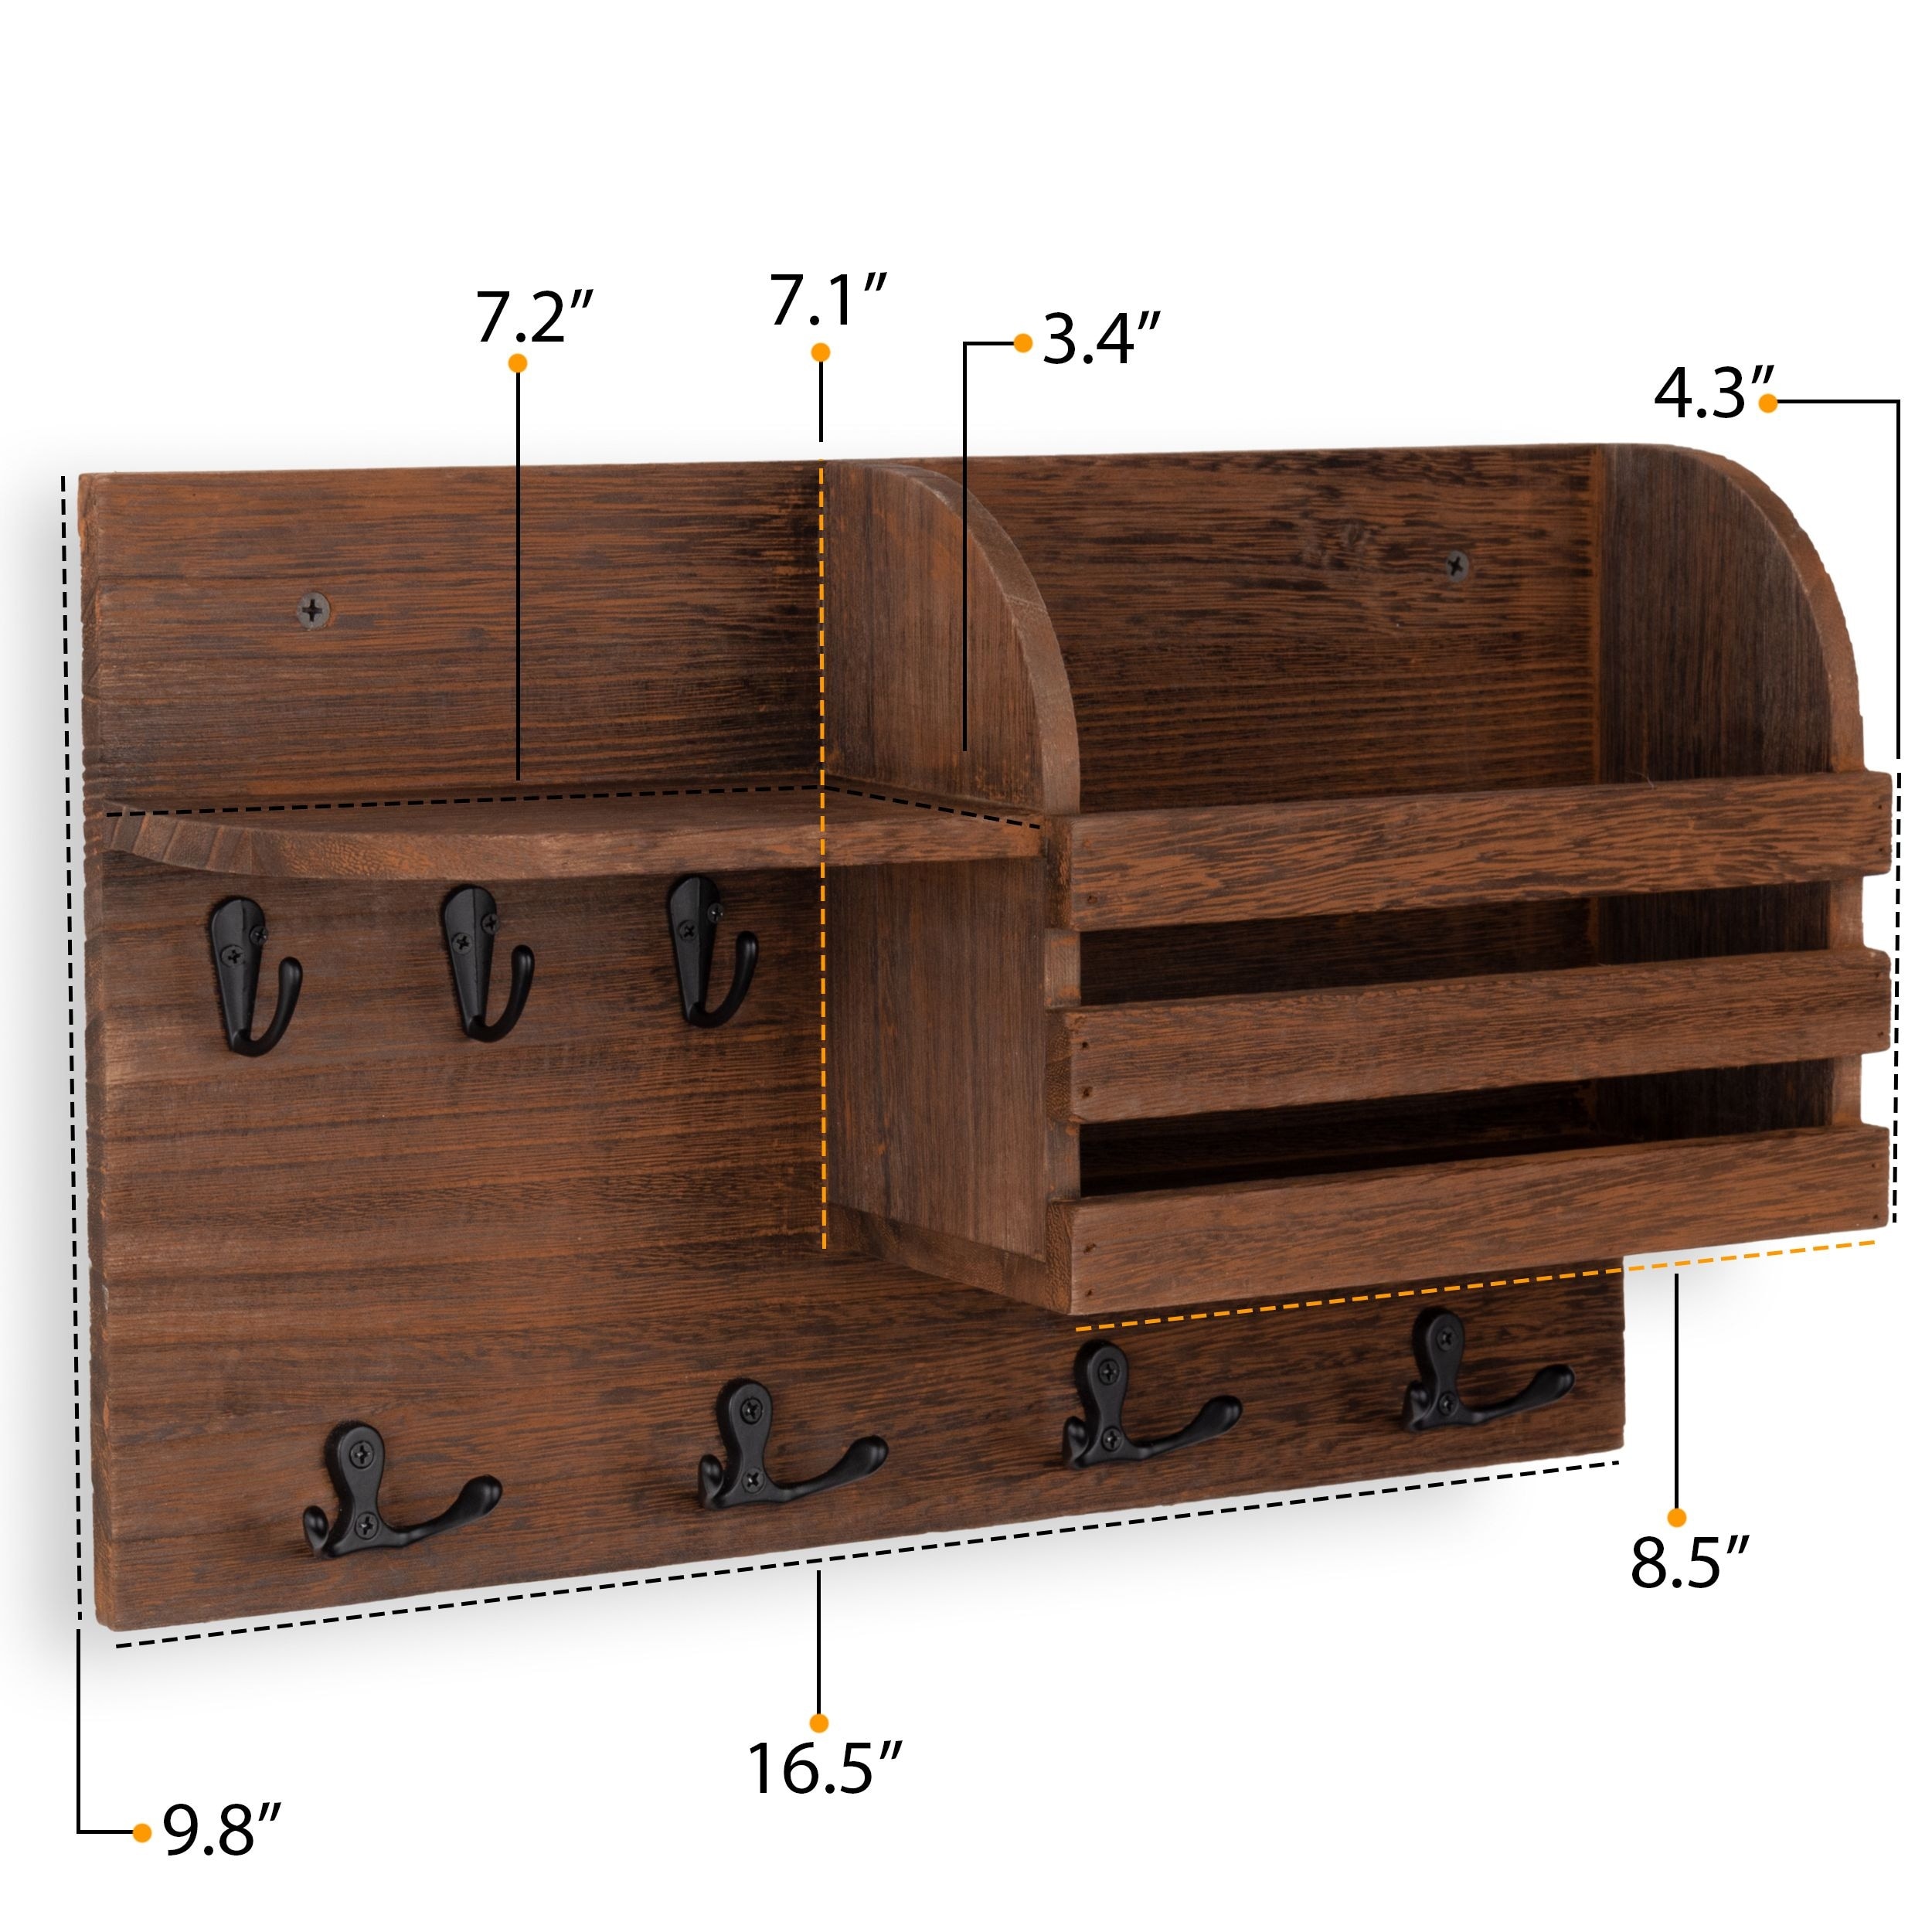 Wallniture Horta Wood Entryway Key Holder and Mail Organizer with 